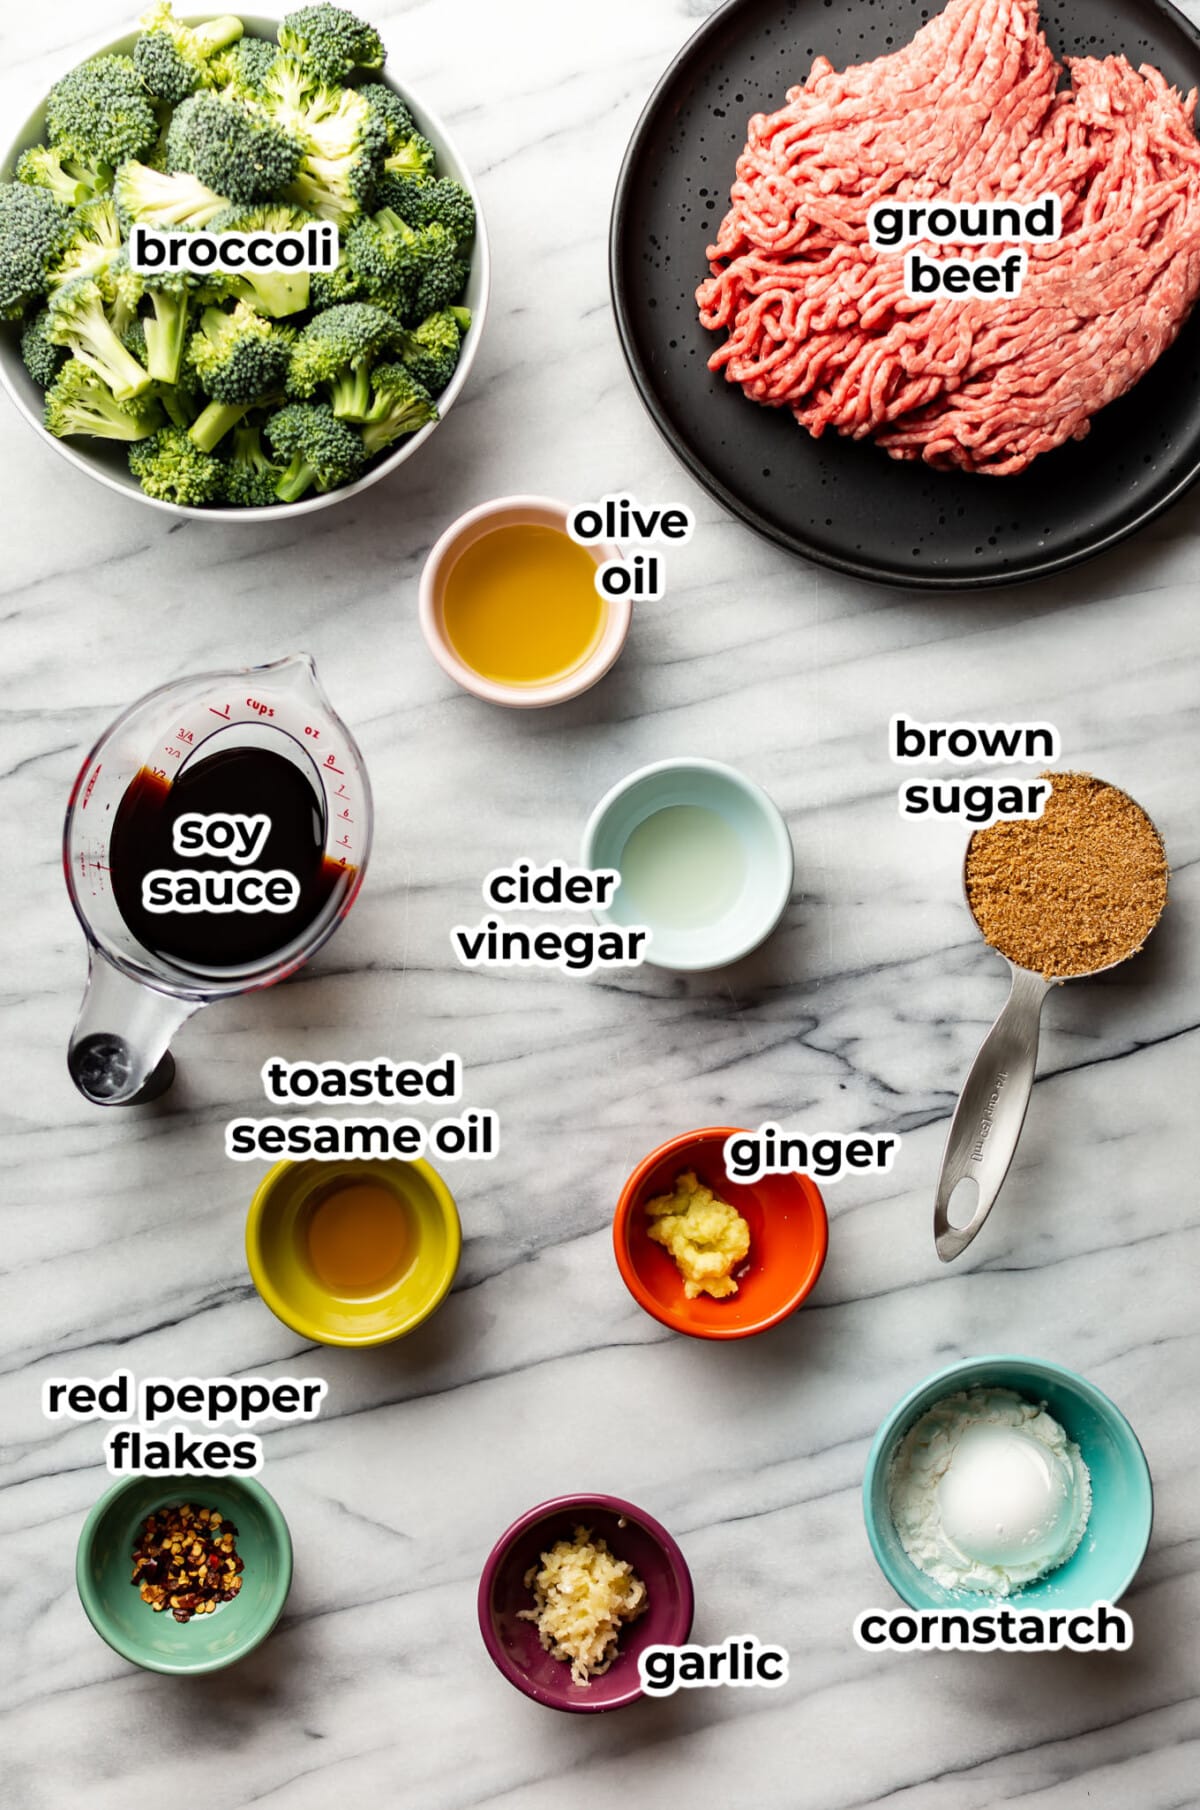 ingredients for ground beef and broccoli in prep bowls